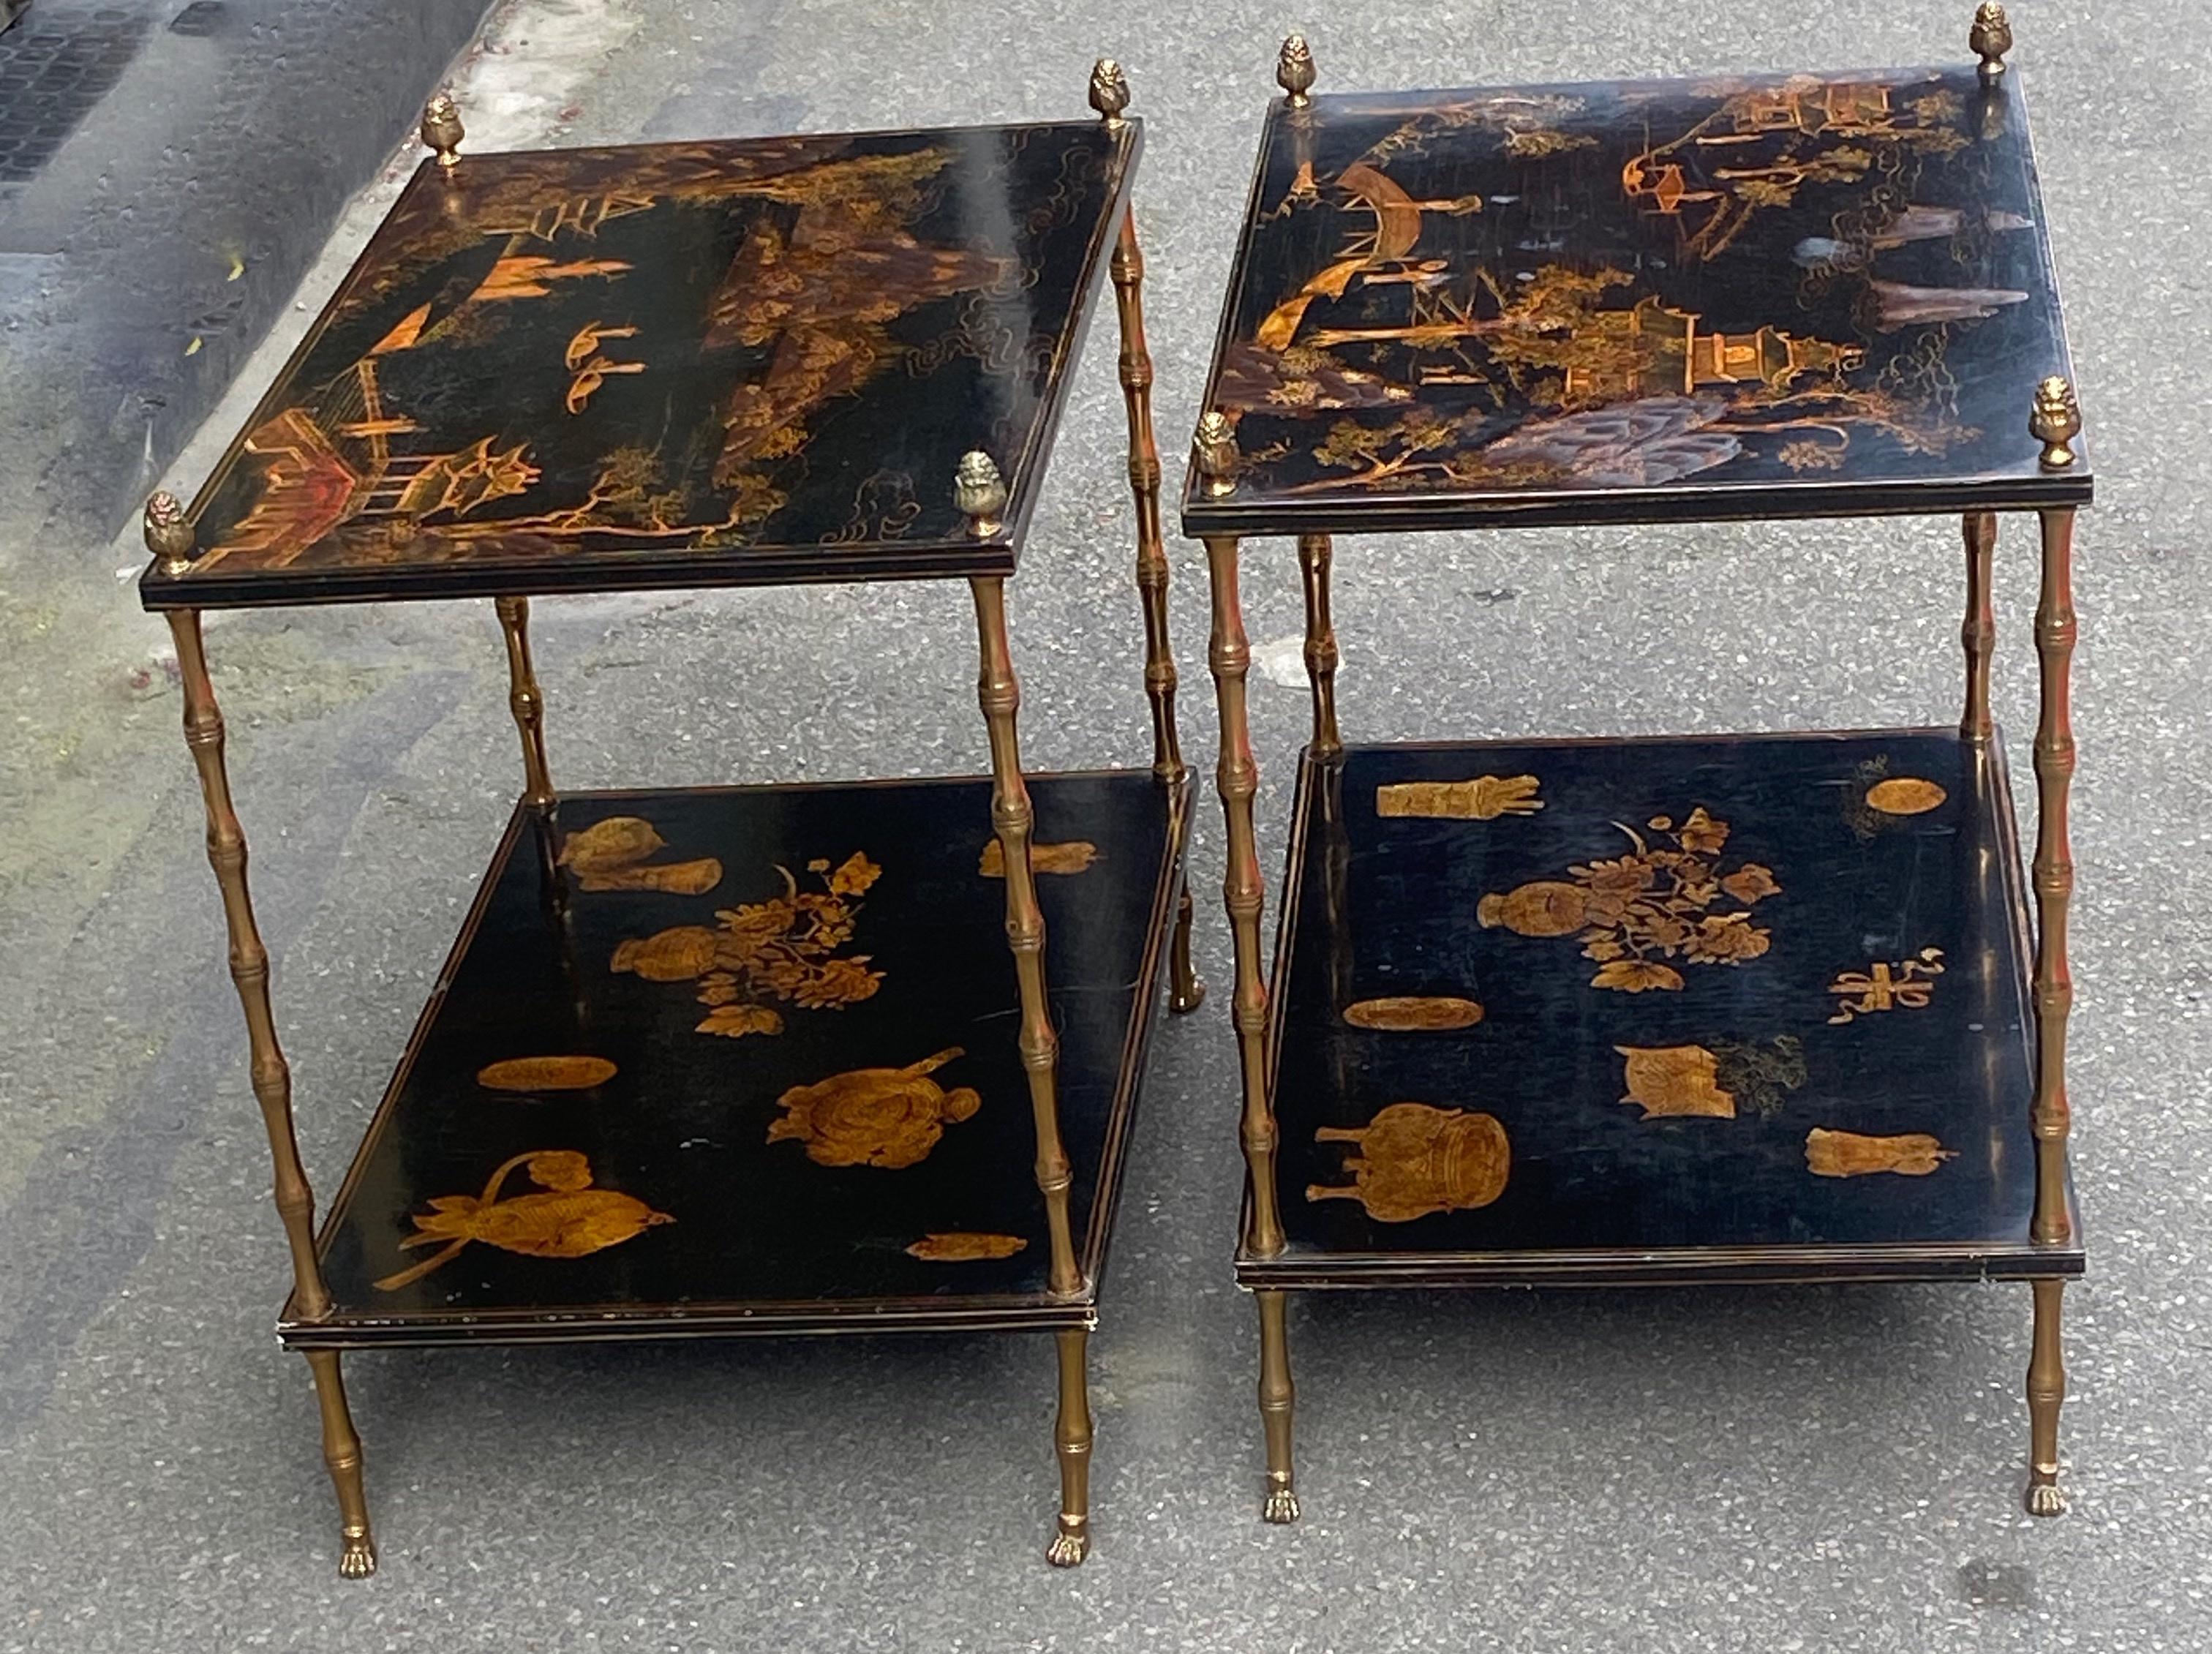 1950 Pair of Maison Baguès Tables Bamboo Decor in Gilt Bronze with Chinese Lacq 3